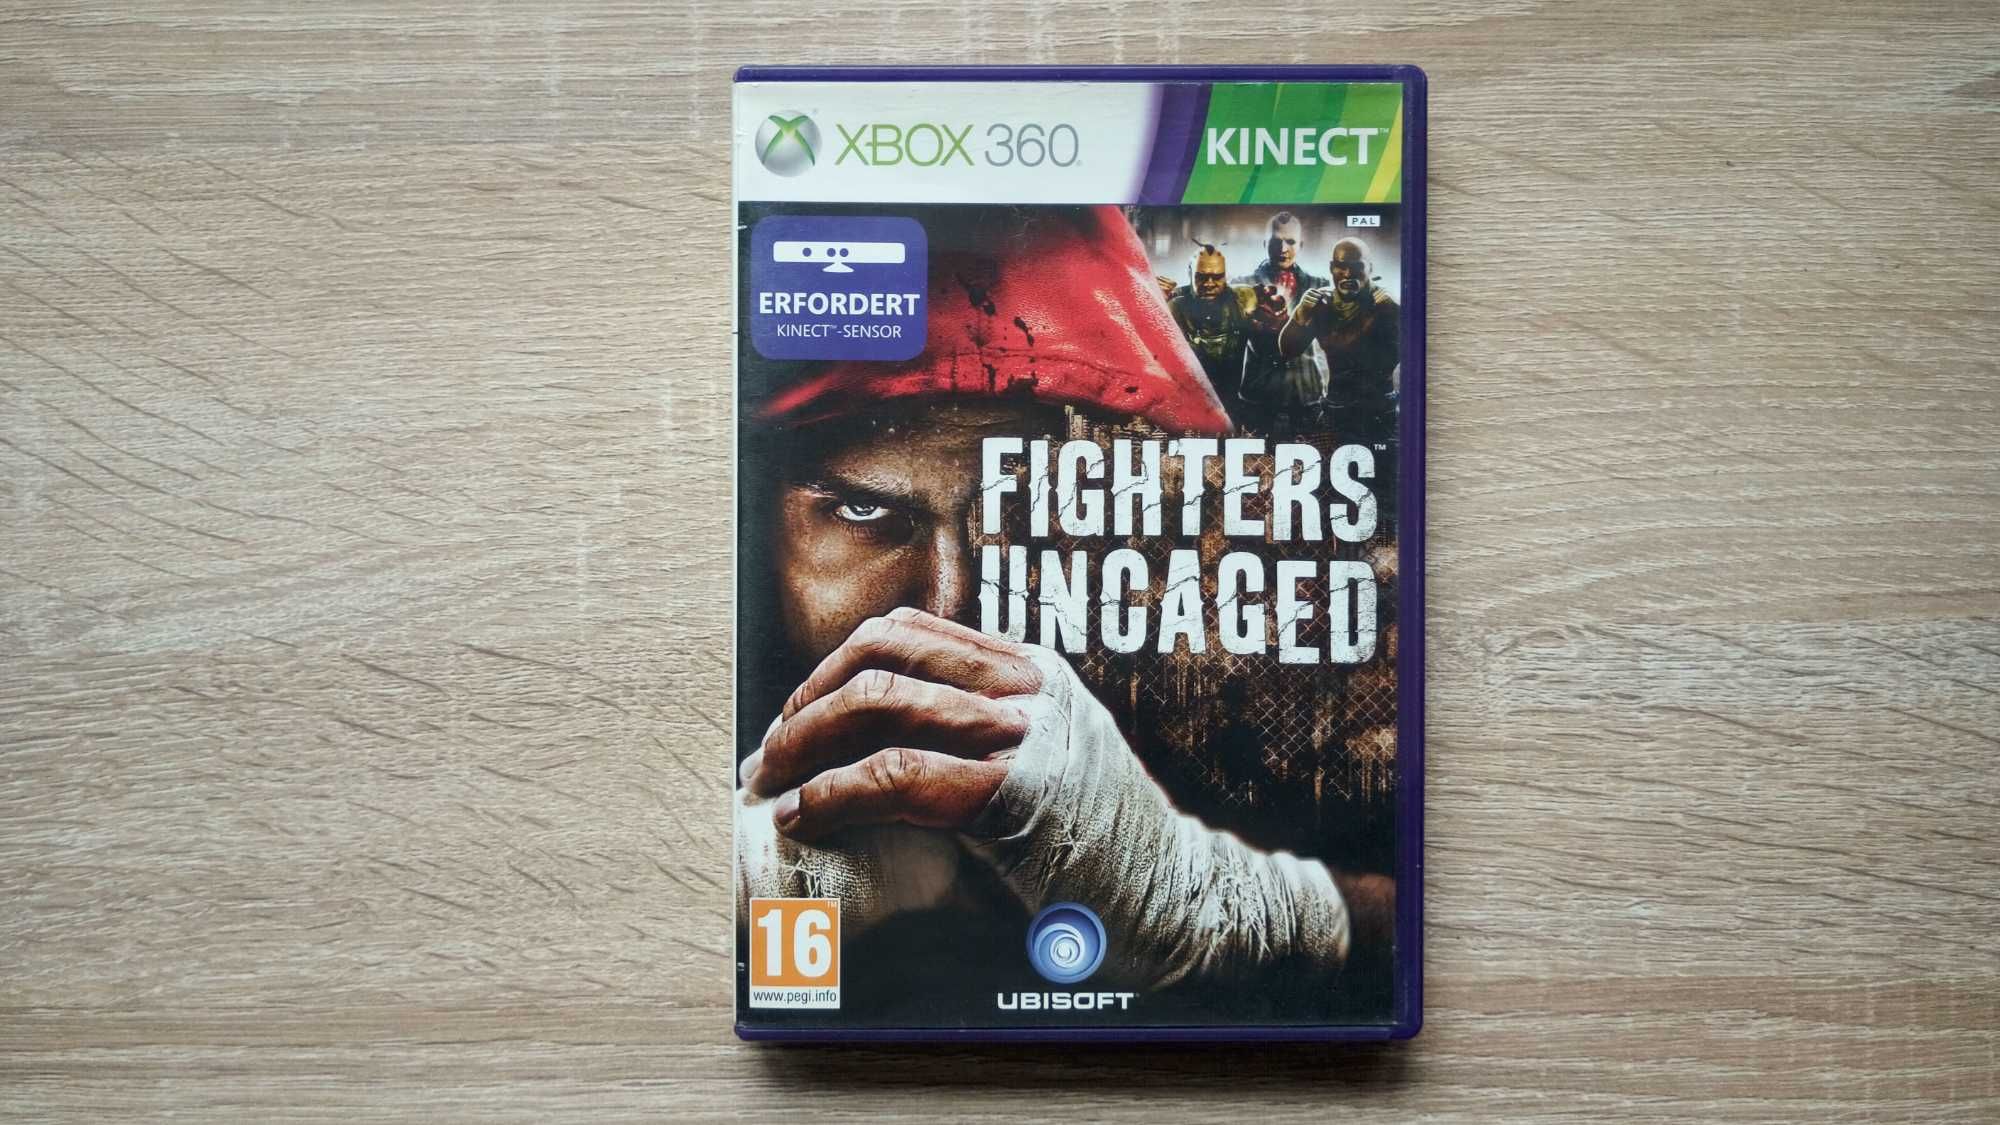 Joc Fighters Uncaged Xbox 360 KINECT